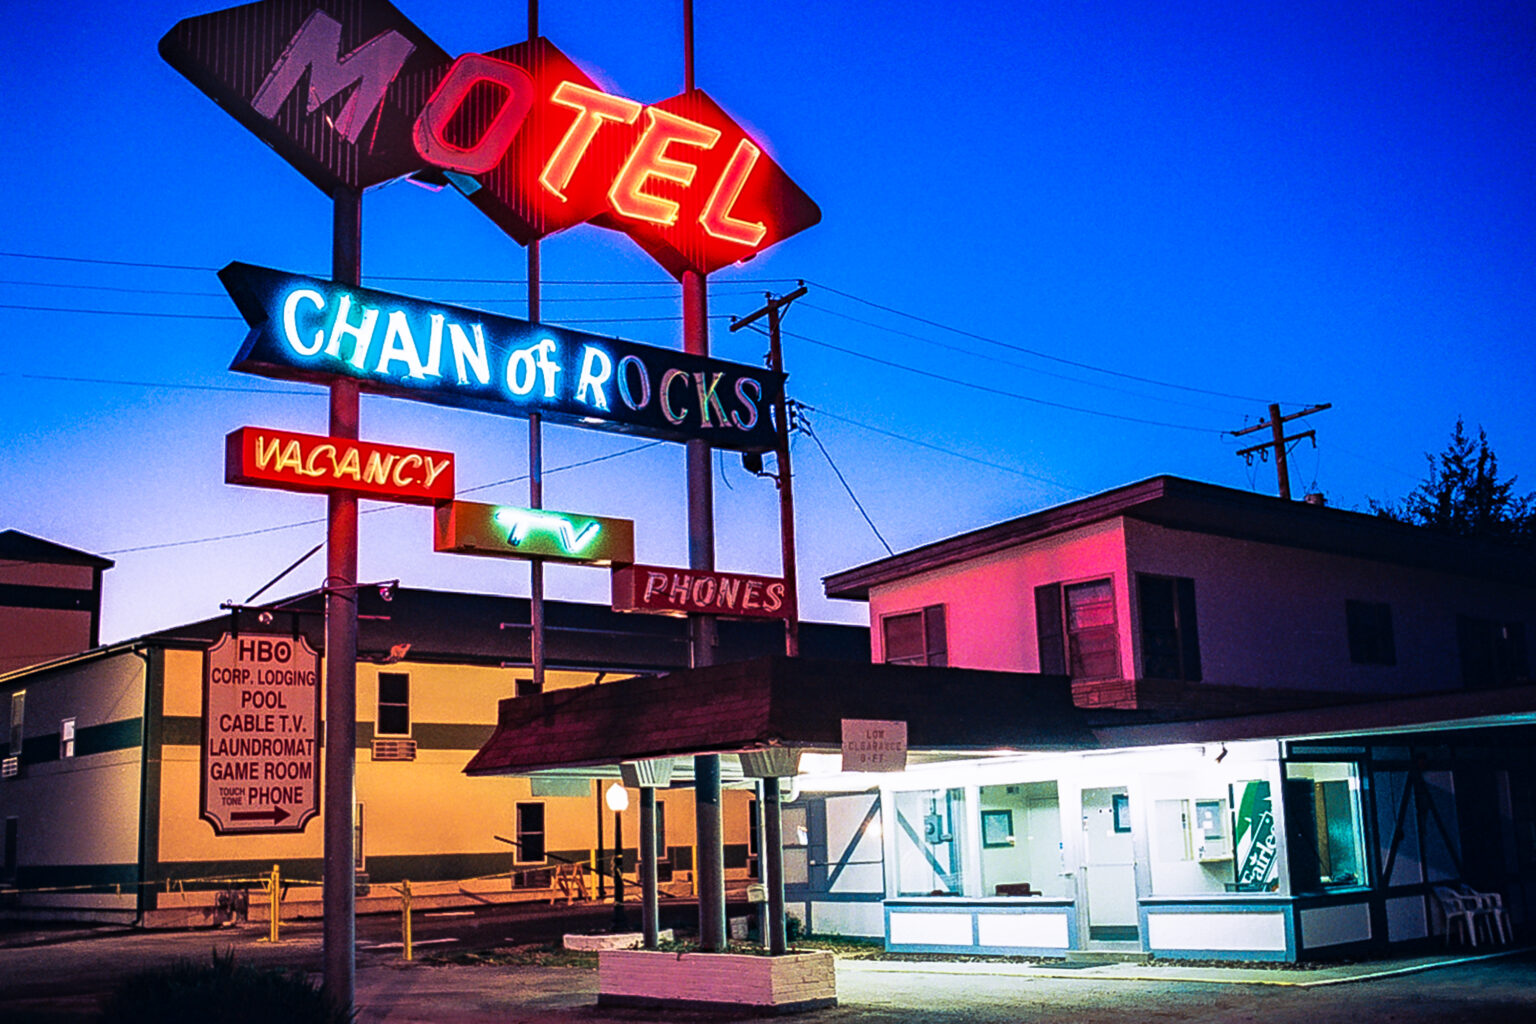 Chain of Rocks Motel on the Mississippi river border between Illinois and Misouri at dusk, with the historic Route 55 neon signage all lit up in the sky